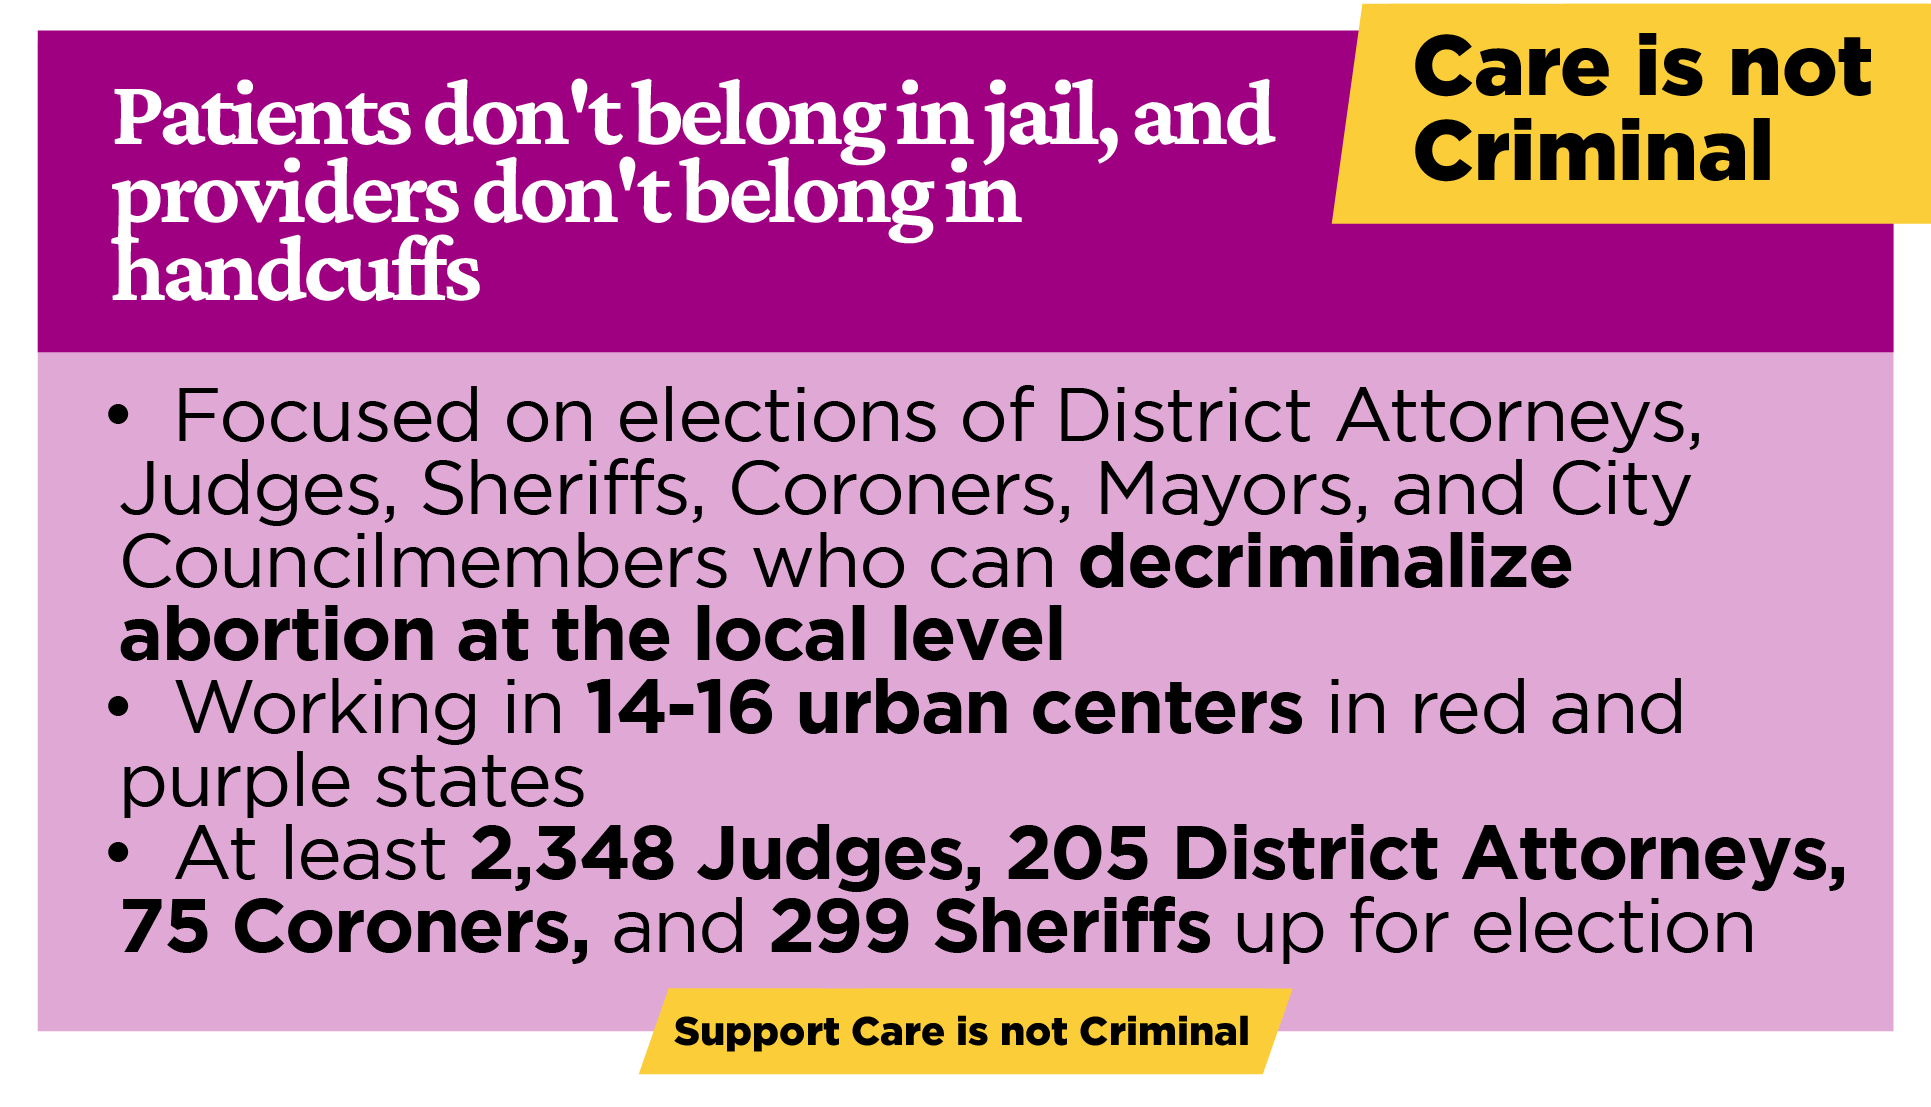  Patients don't belong in jail, and providers don't belong in handcuffs: Focused on election District Attorneys, Judges, Sheriffs, Coroners, Mayors, and City Councilmembers who can decriminalize abortion at the local level; Working in 14-16 urban centers in red and purple states; At least 2,348 Judges, 205 District Attorneys, 75 Coroners, and 299 Sheriffs up for election.